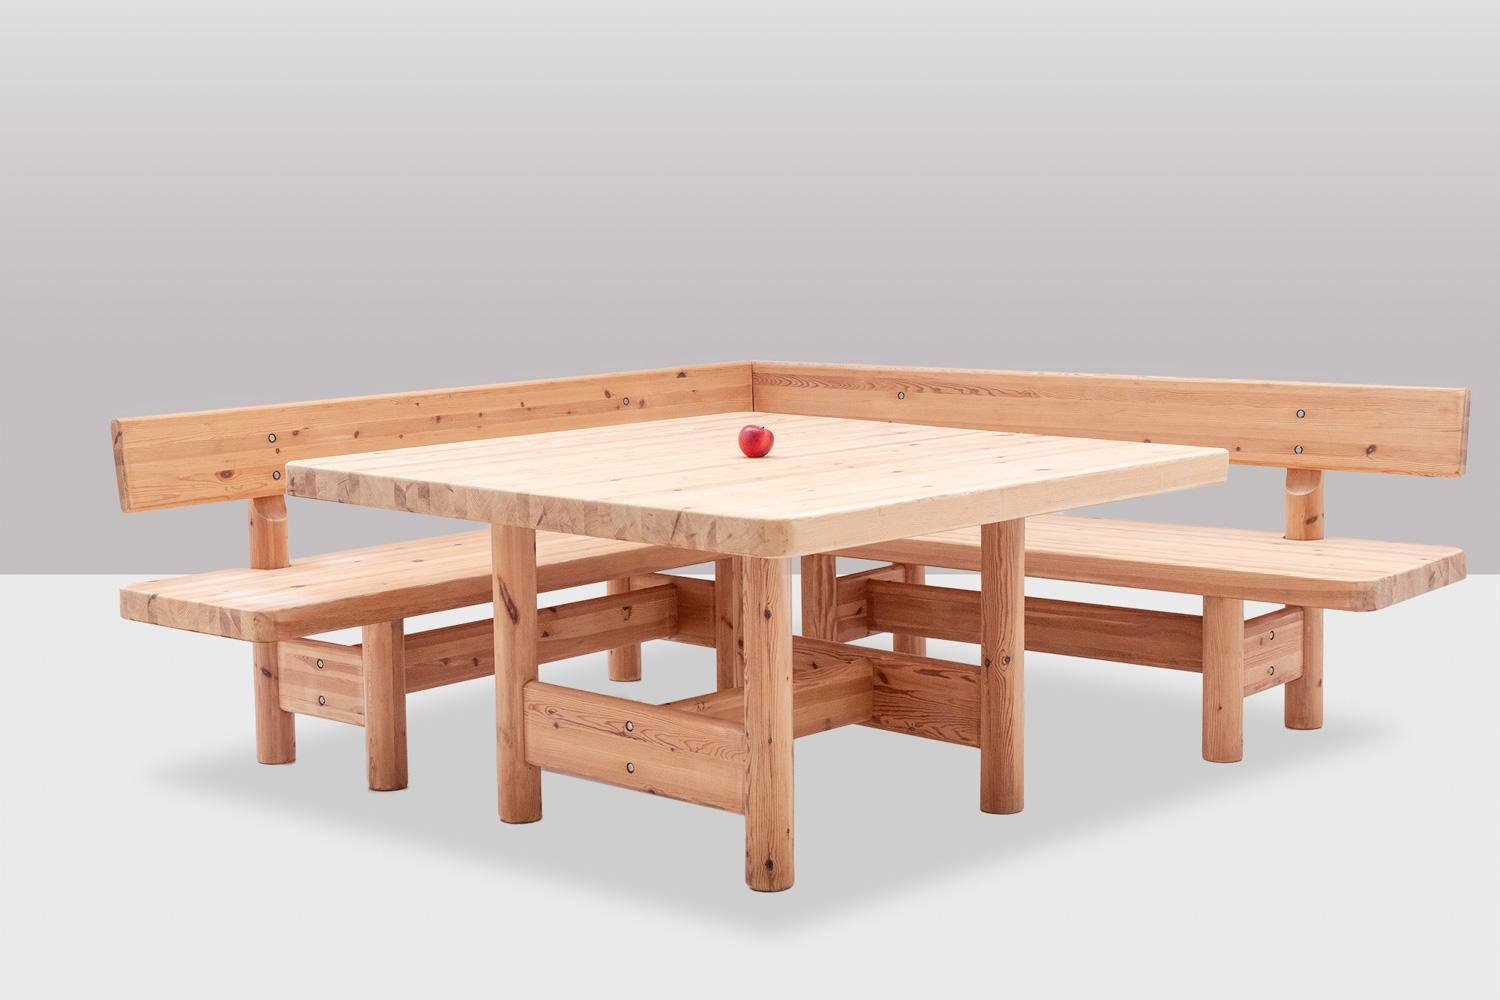 Rainer Daumiller, by.

Set in larch consisting of a square-shaped table and two corner benches nesting one inside the other.

Dimensions:

Table: H 71 x W 129 x D 129 cm
Benches: H 77 x L 196 x D 50 cm

Danish work realized in the 1980s.

Reference: